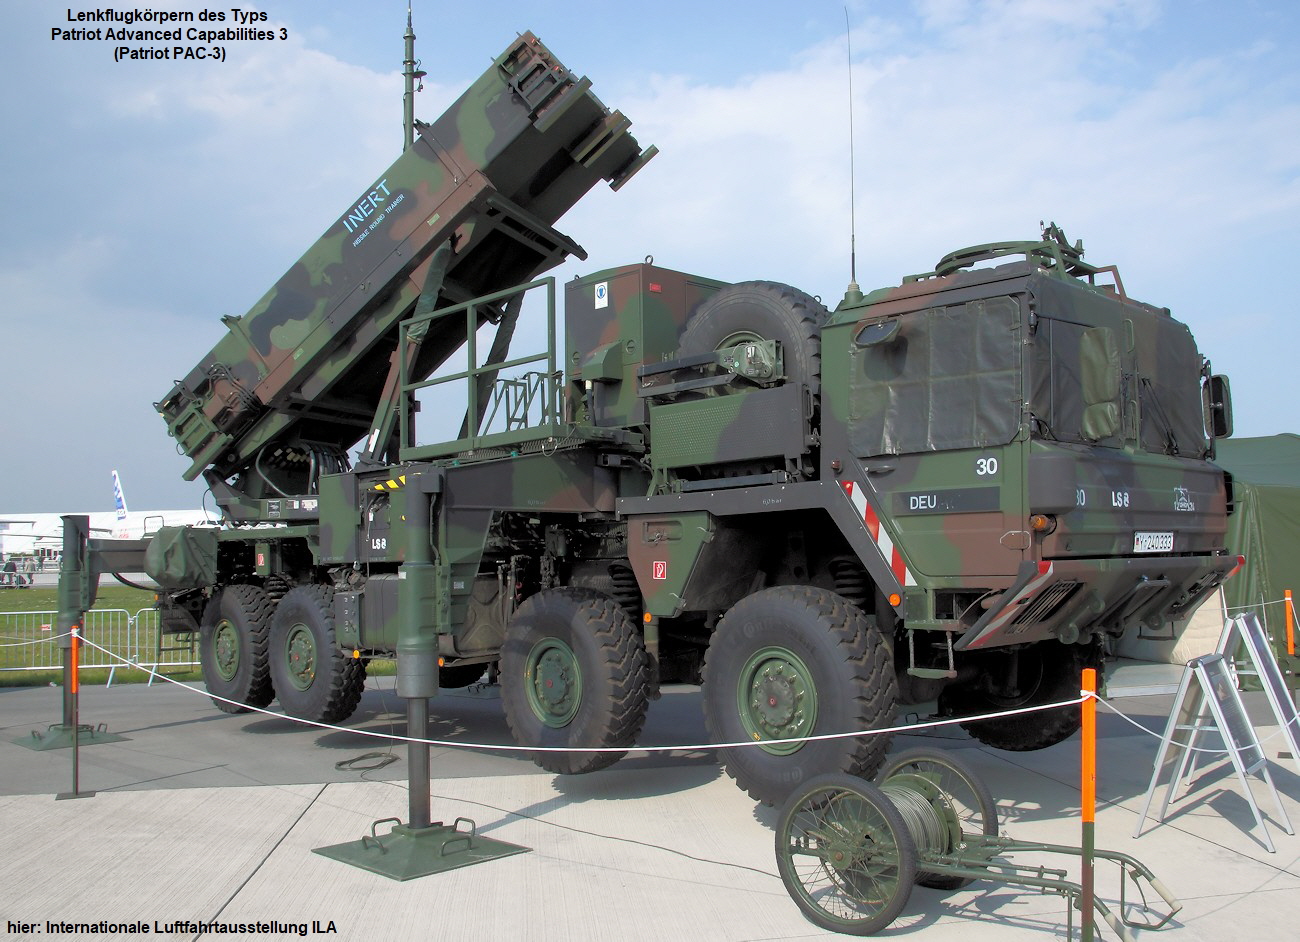 Patriot PAC-3 Phased Array Tracking Radar To Intercept Of Target